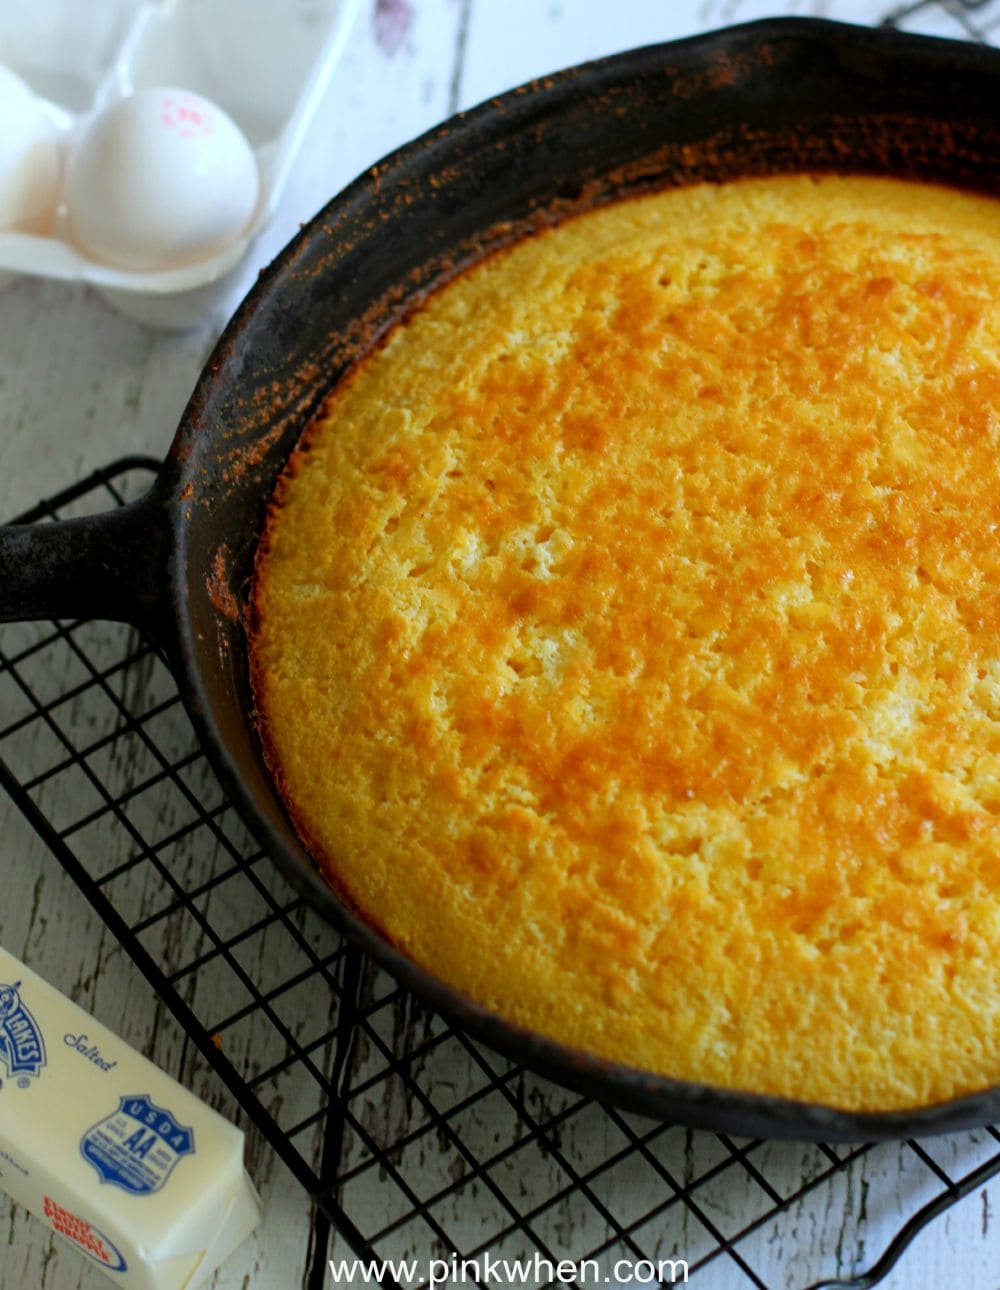 Skillet Cornbread is a quick and easy recipe that is made with just a handful of ingredients. It's the perfect easy cast iron skillet cornbread recipe that can be used with all of your favorite soups, stews, chili's, and more!